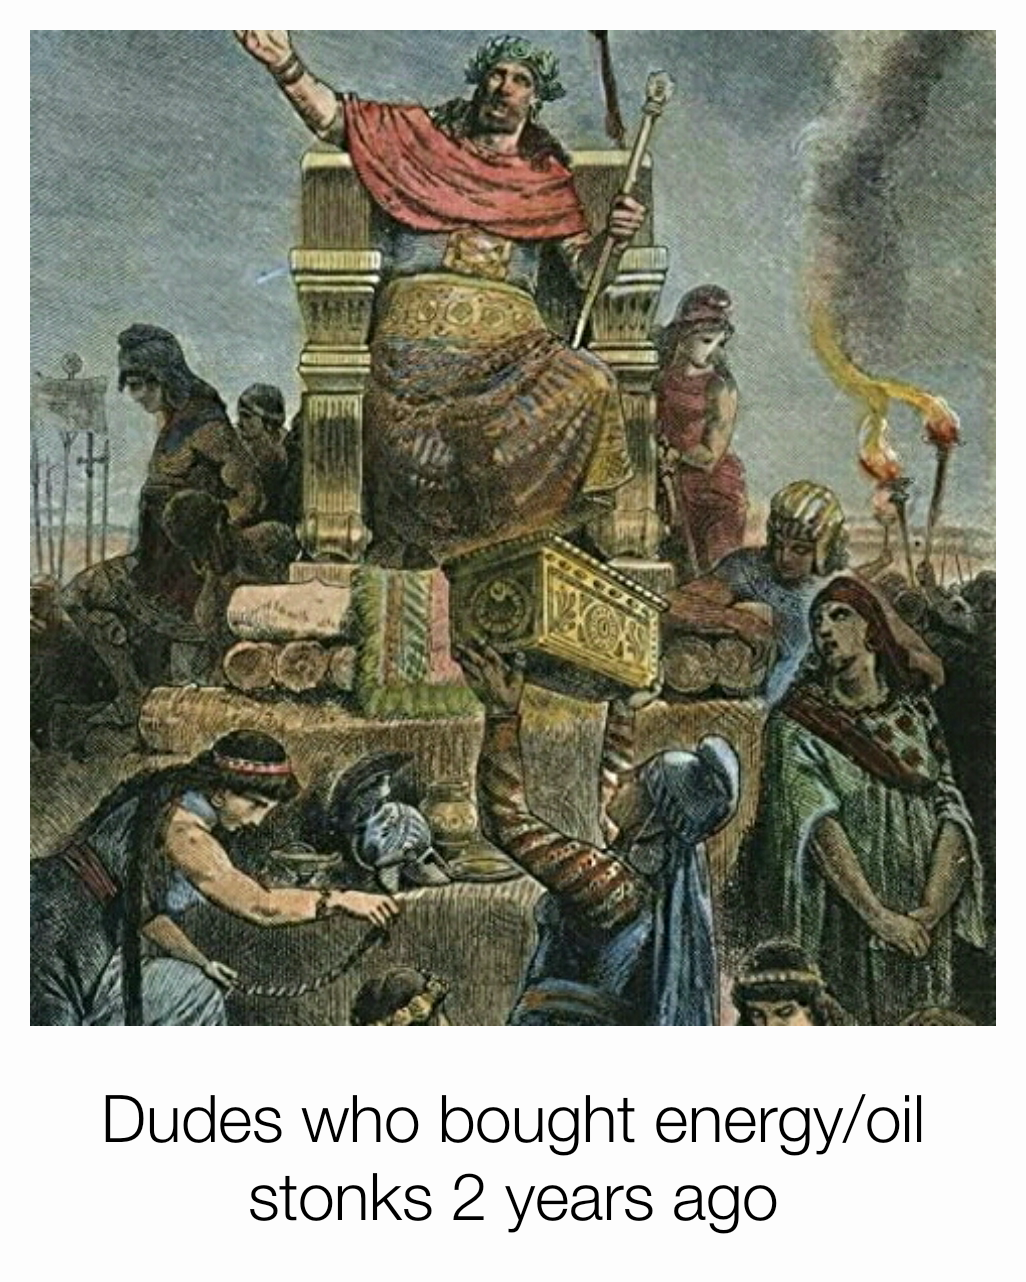 Dudes who bought energy/oil stonks 2 years ago